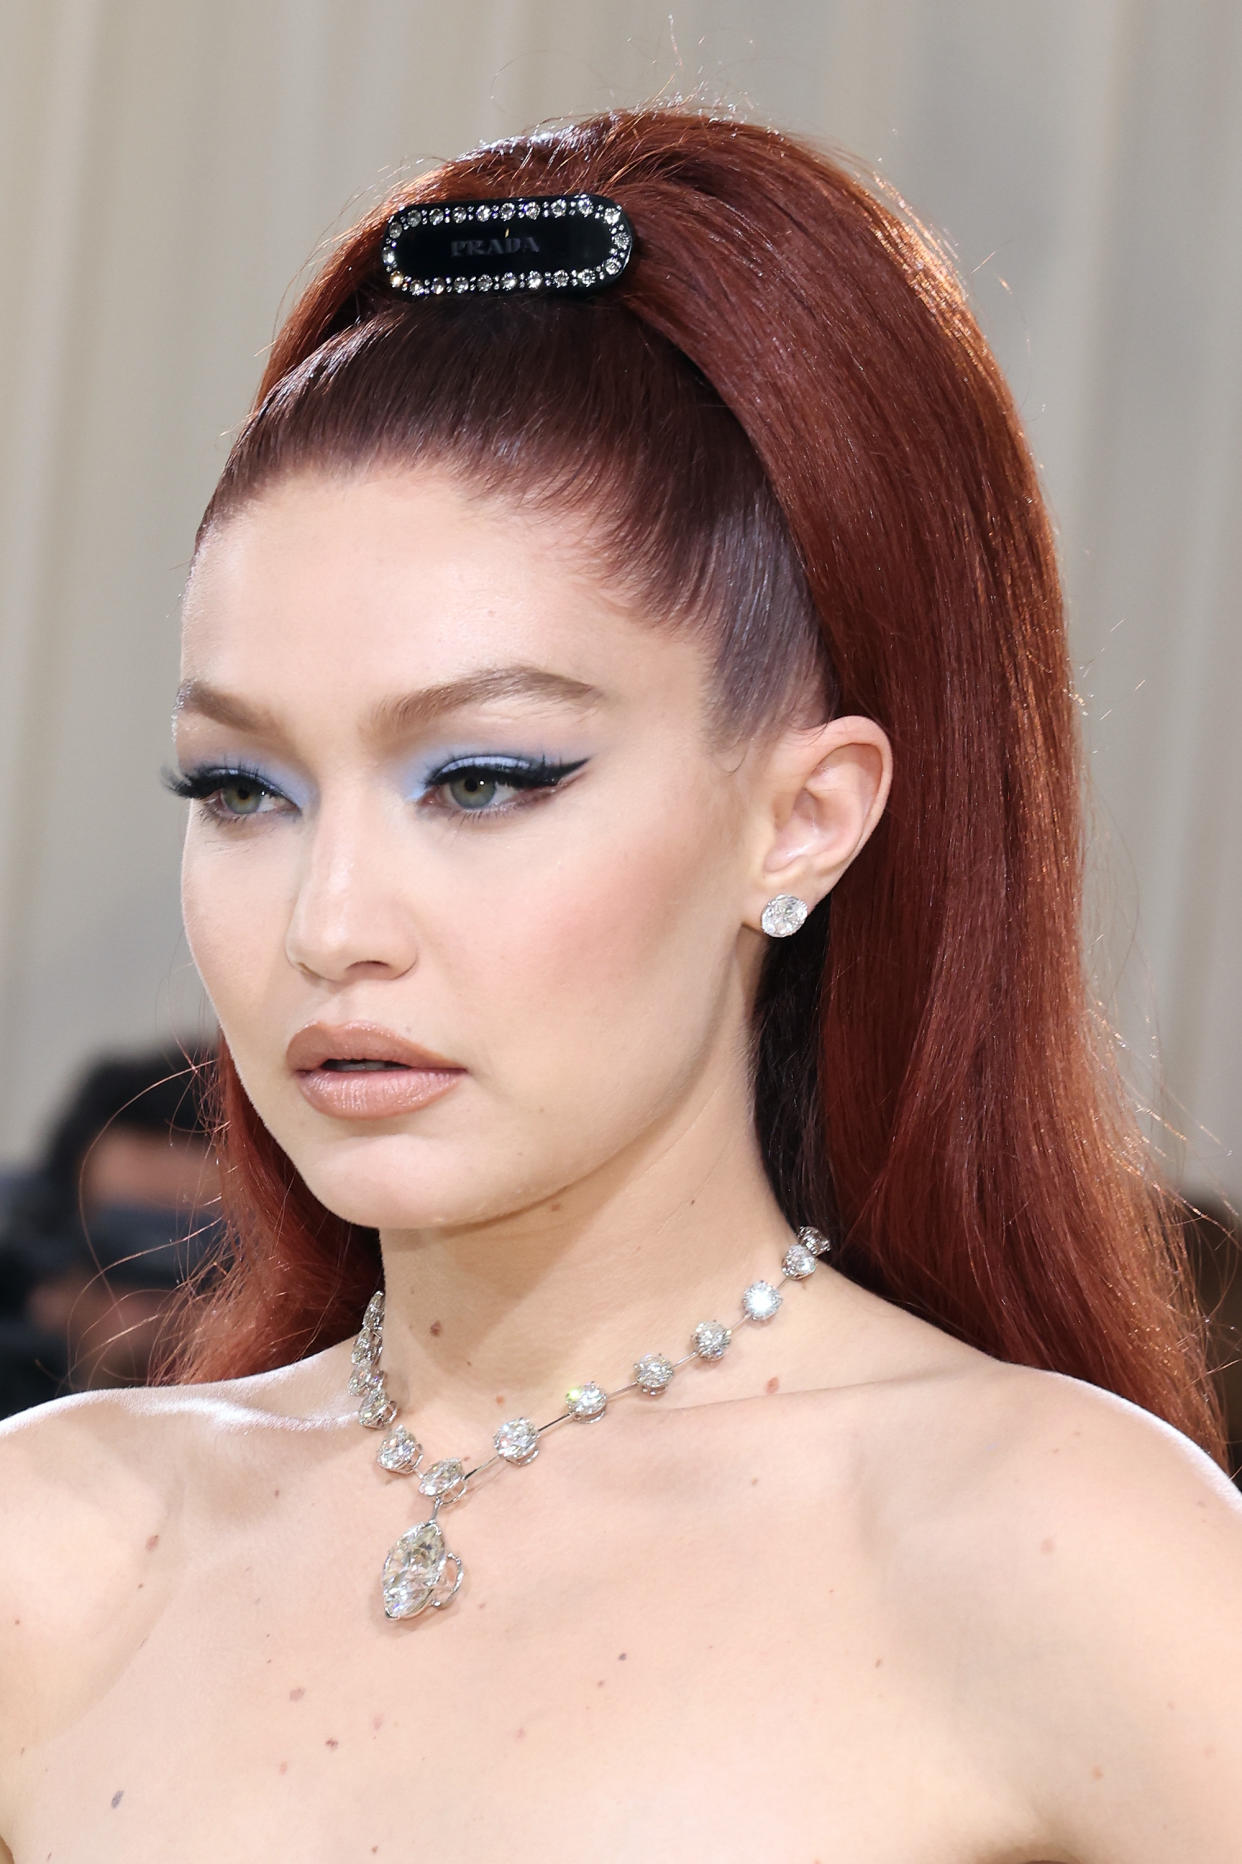 Gigi Hadid boasted a glowing complexion, thanks to Maybelline's affordable concealer at the 2021 Met Gala. (Getty Images)